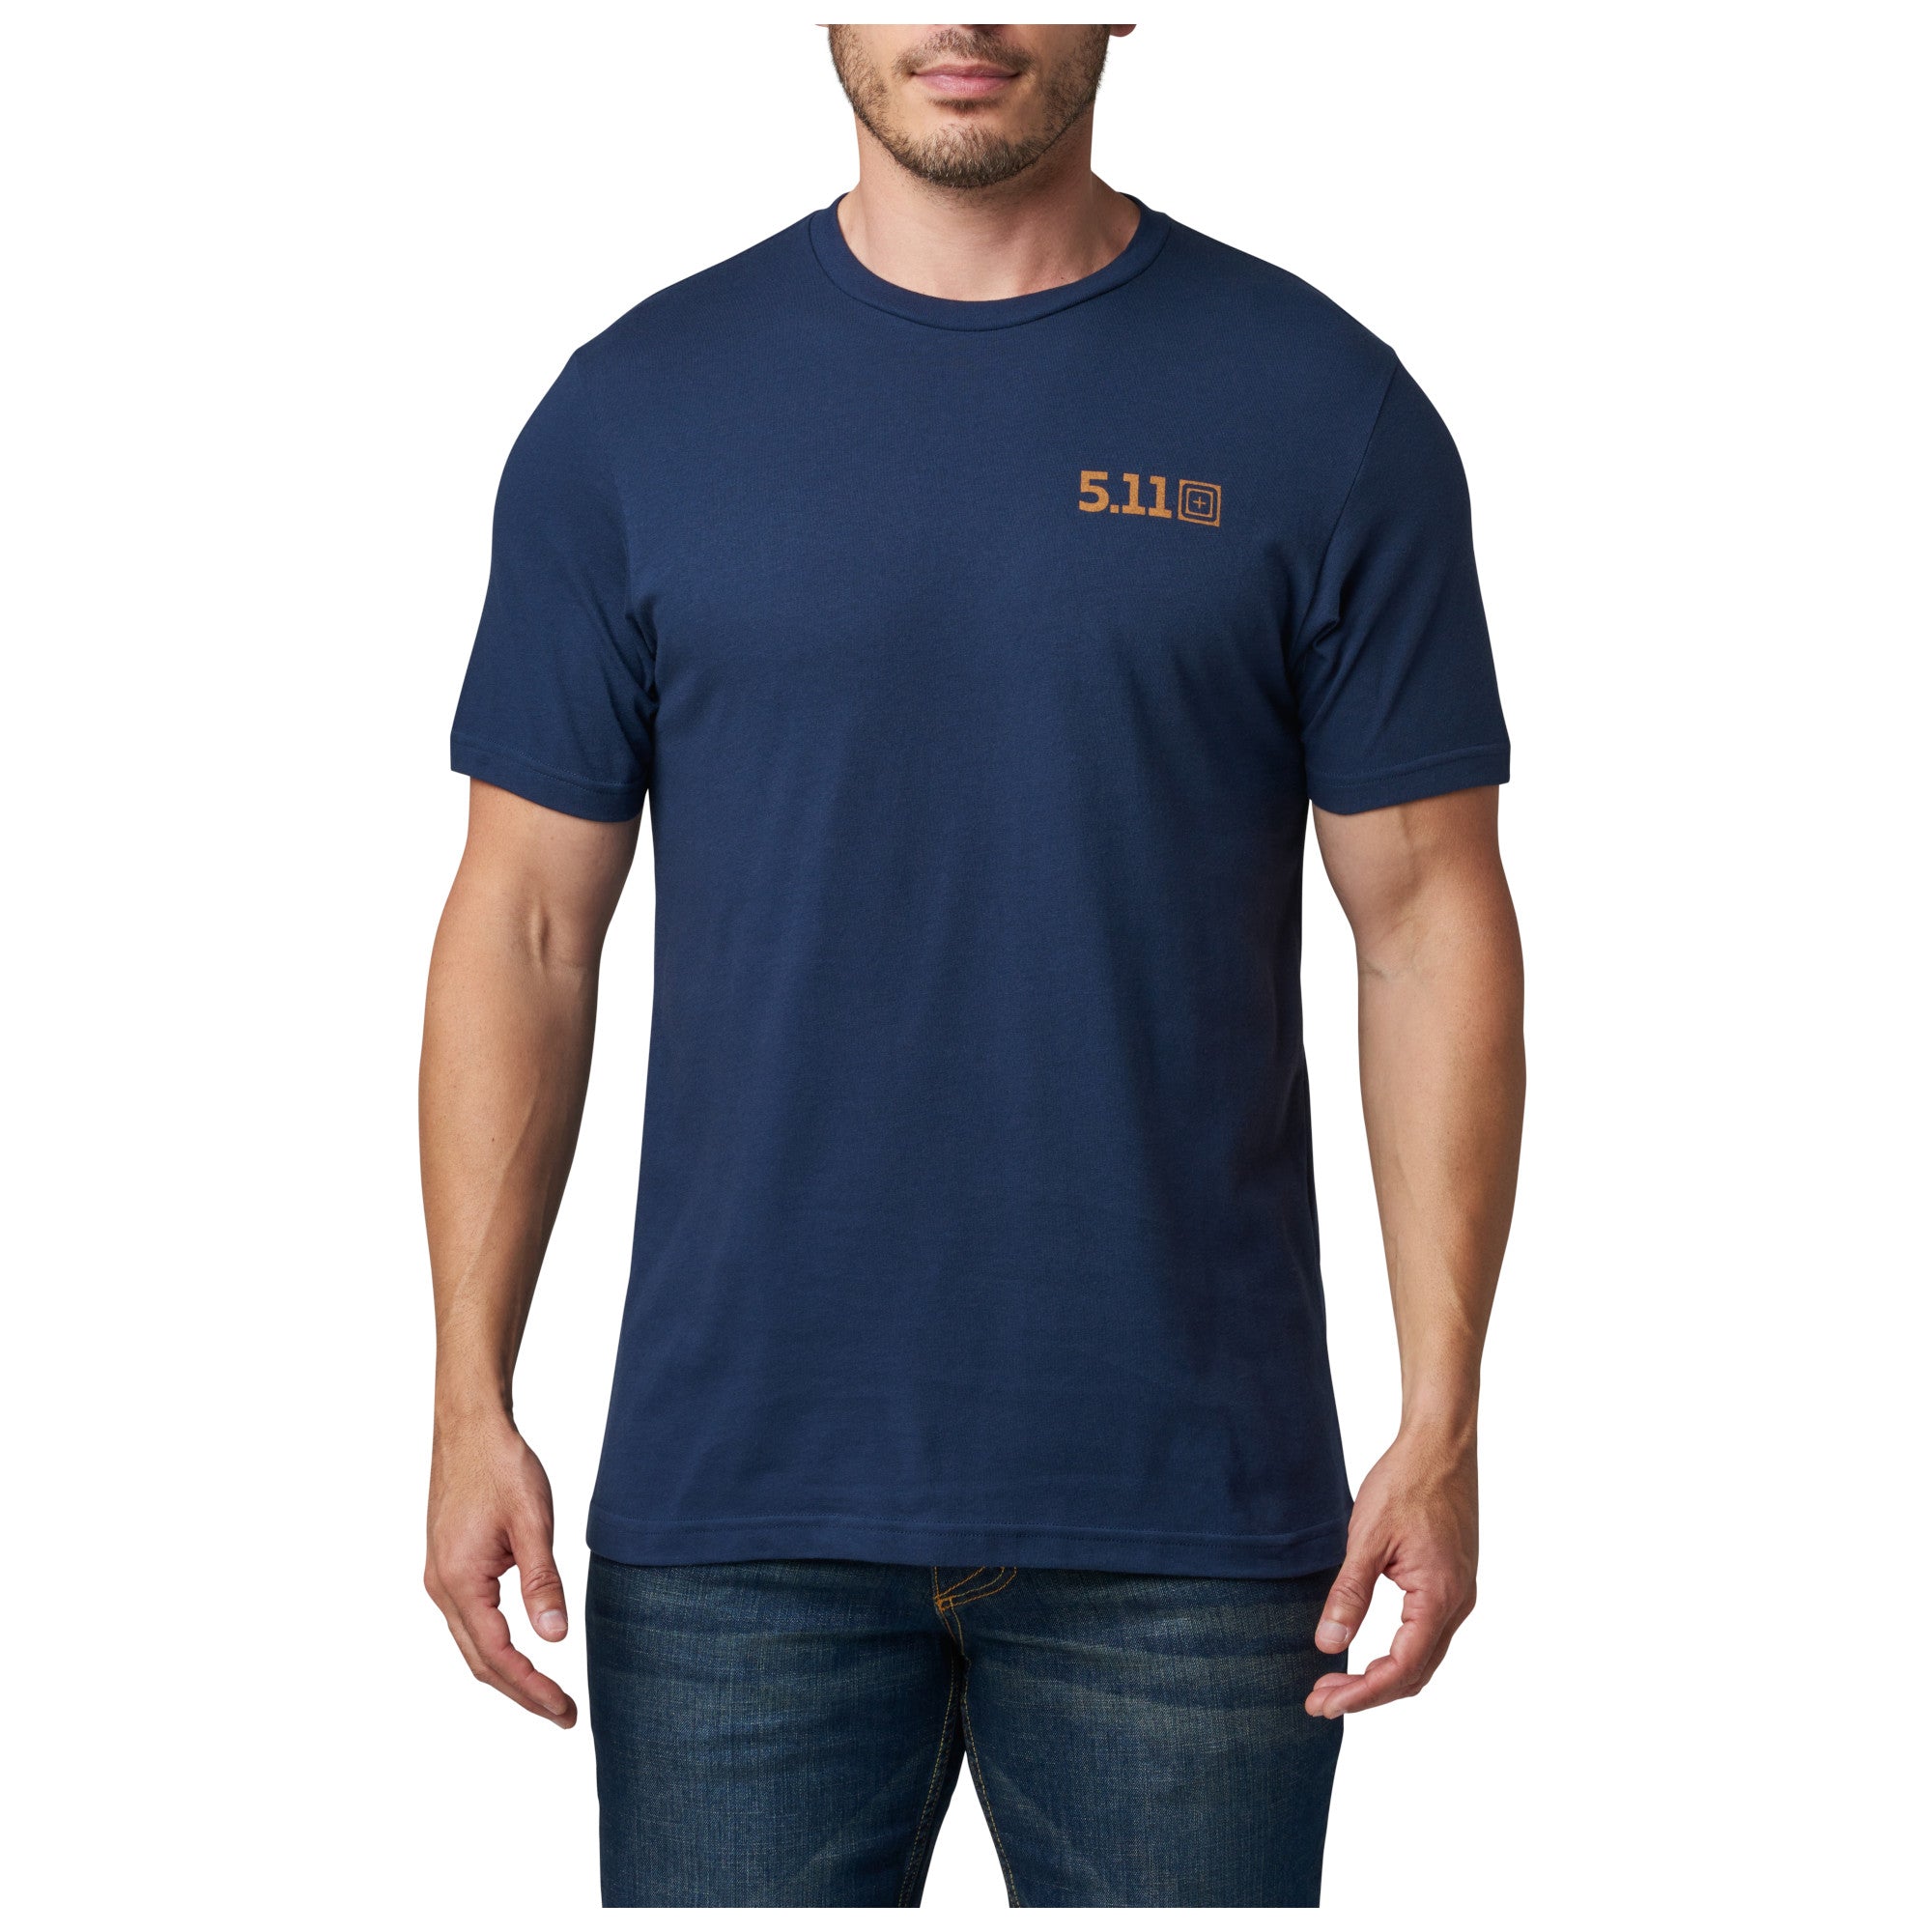 5.11 Tactical Freedom Fries Tee Pacific Navy Tactical Gear Australia Supplier Distributor Dealer